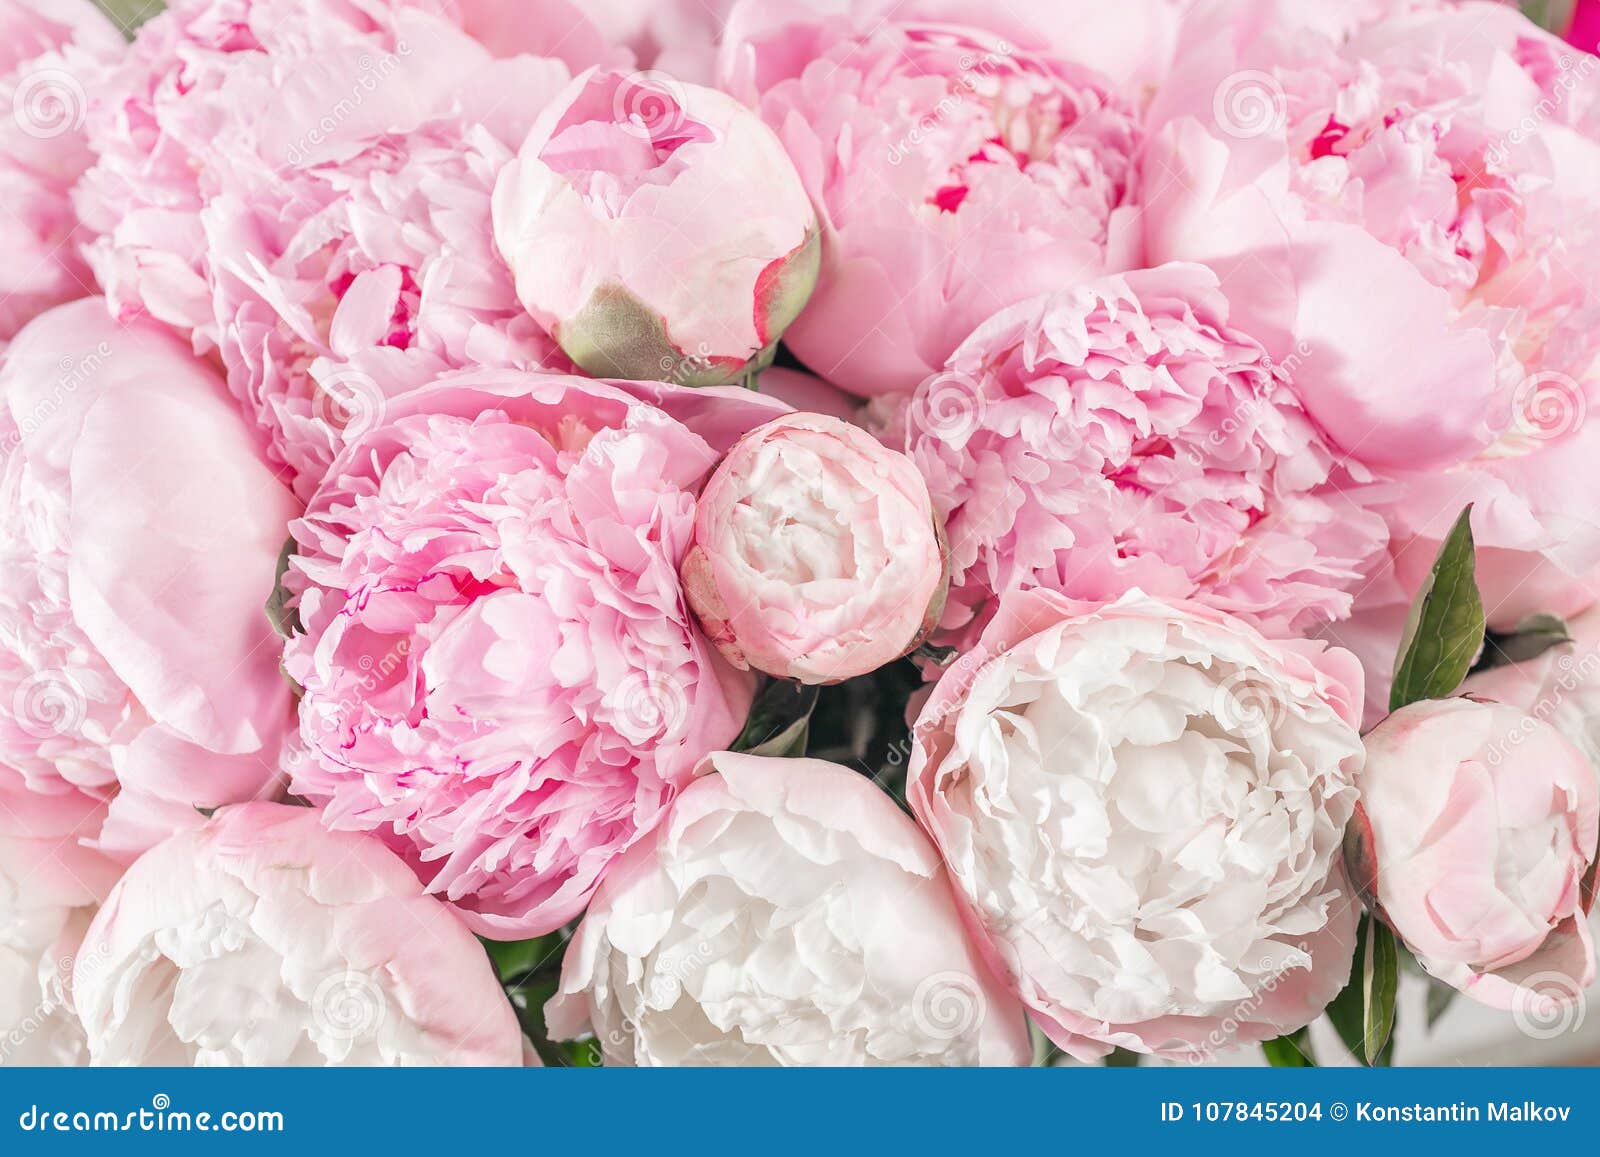 elegant bouquet of a lot of peonies of pink color close up. beautiful flower for any holiday. lots of pretty and